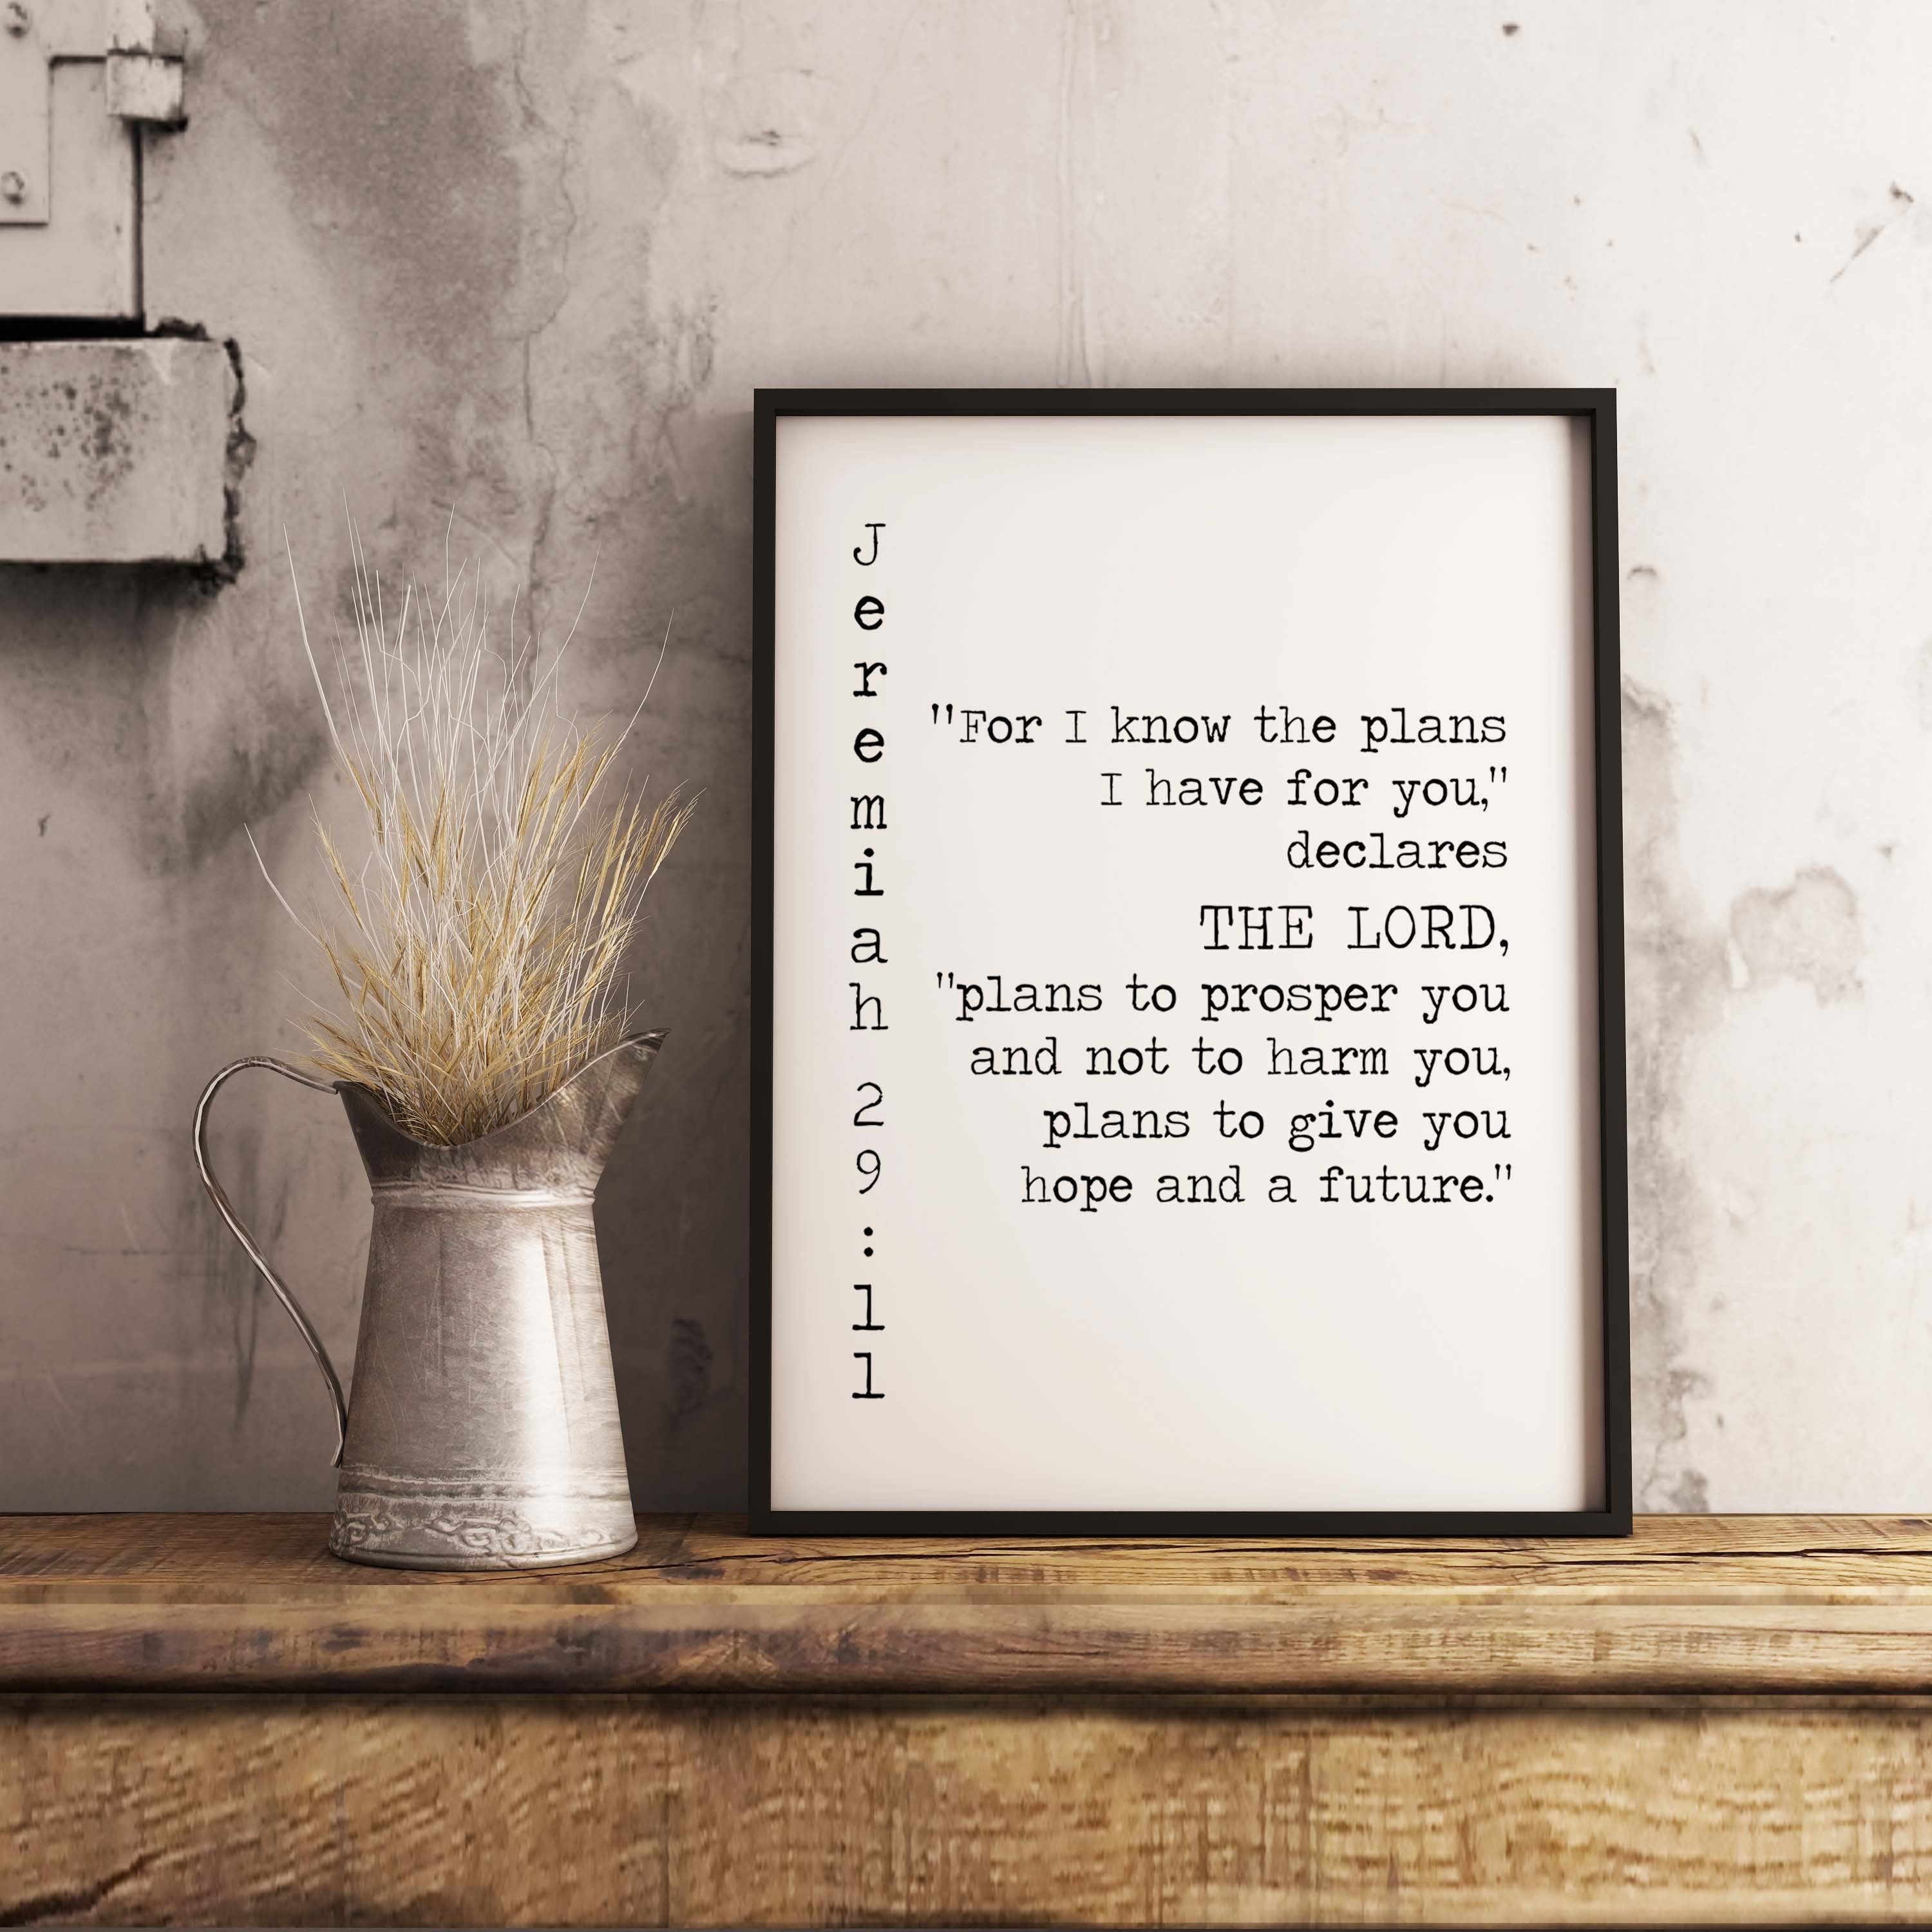 Jeremiah 29:11 Bible Verse Print, Give you Hope and a Future Inspirational Gift Wall Art in Black & White